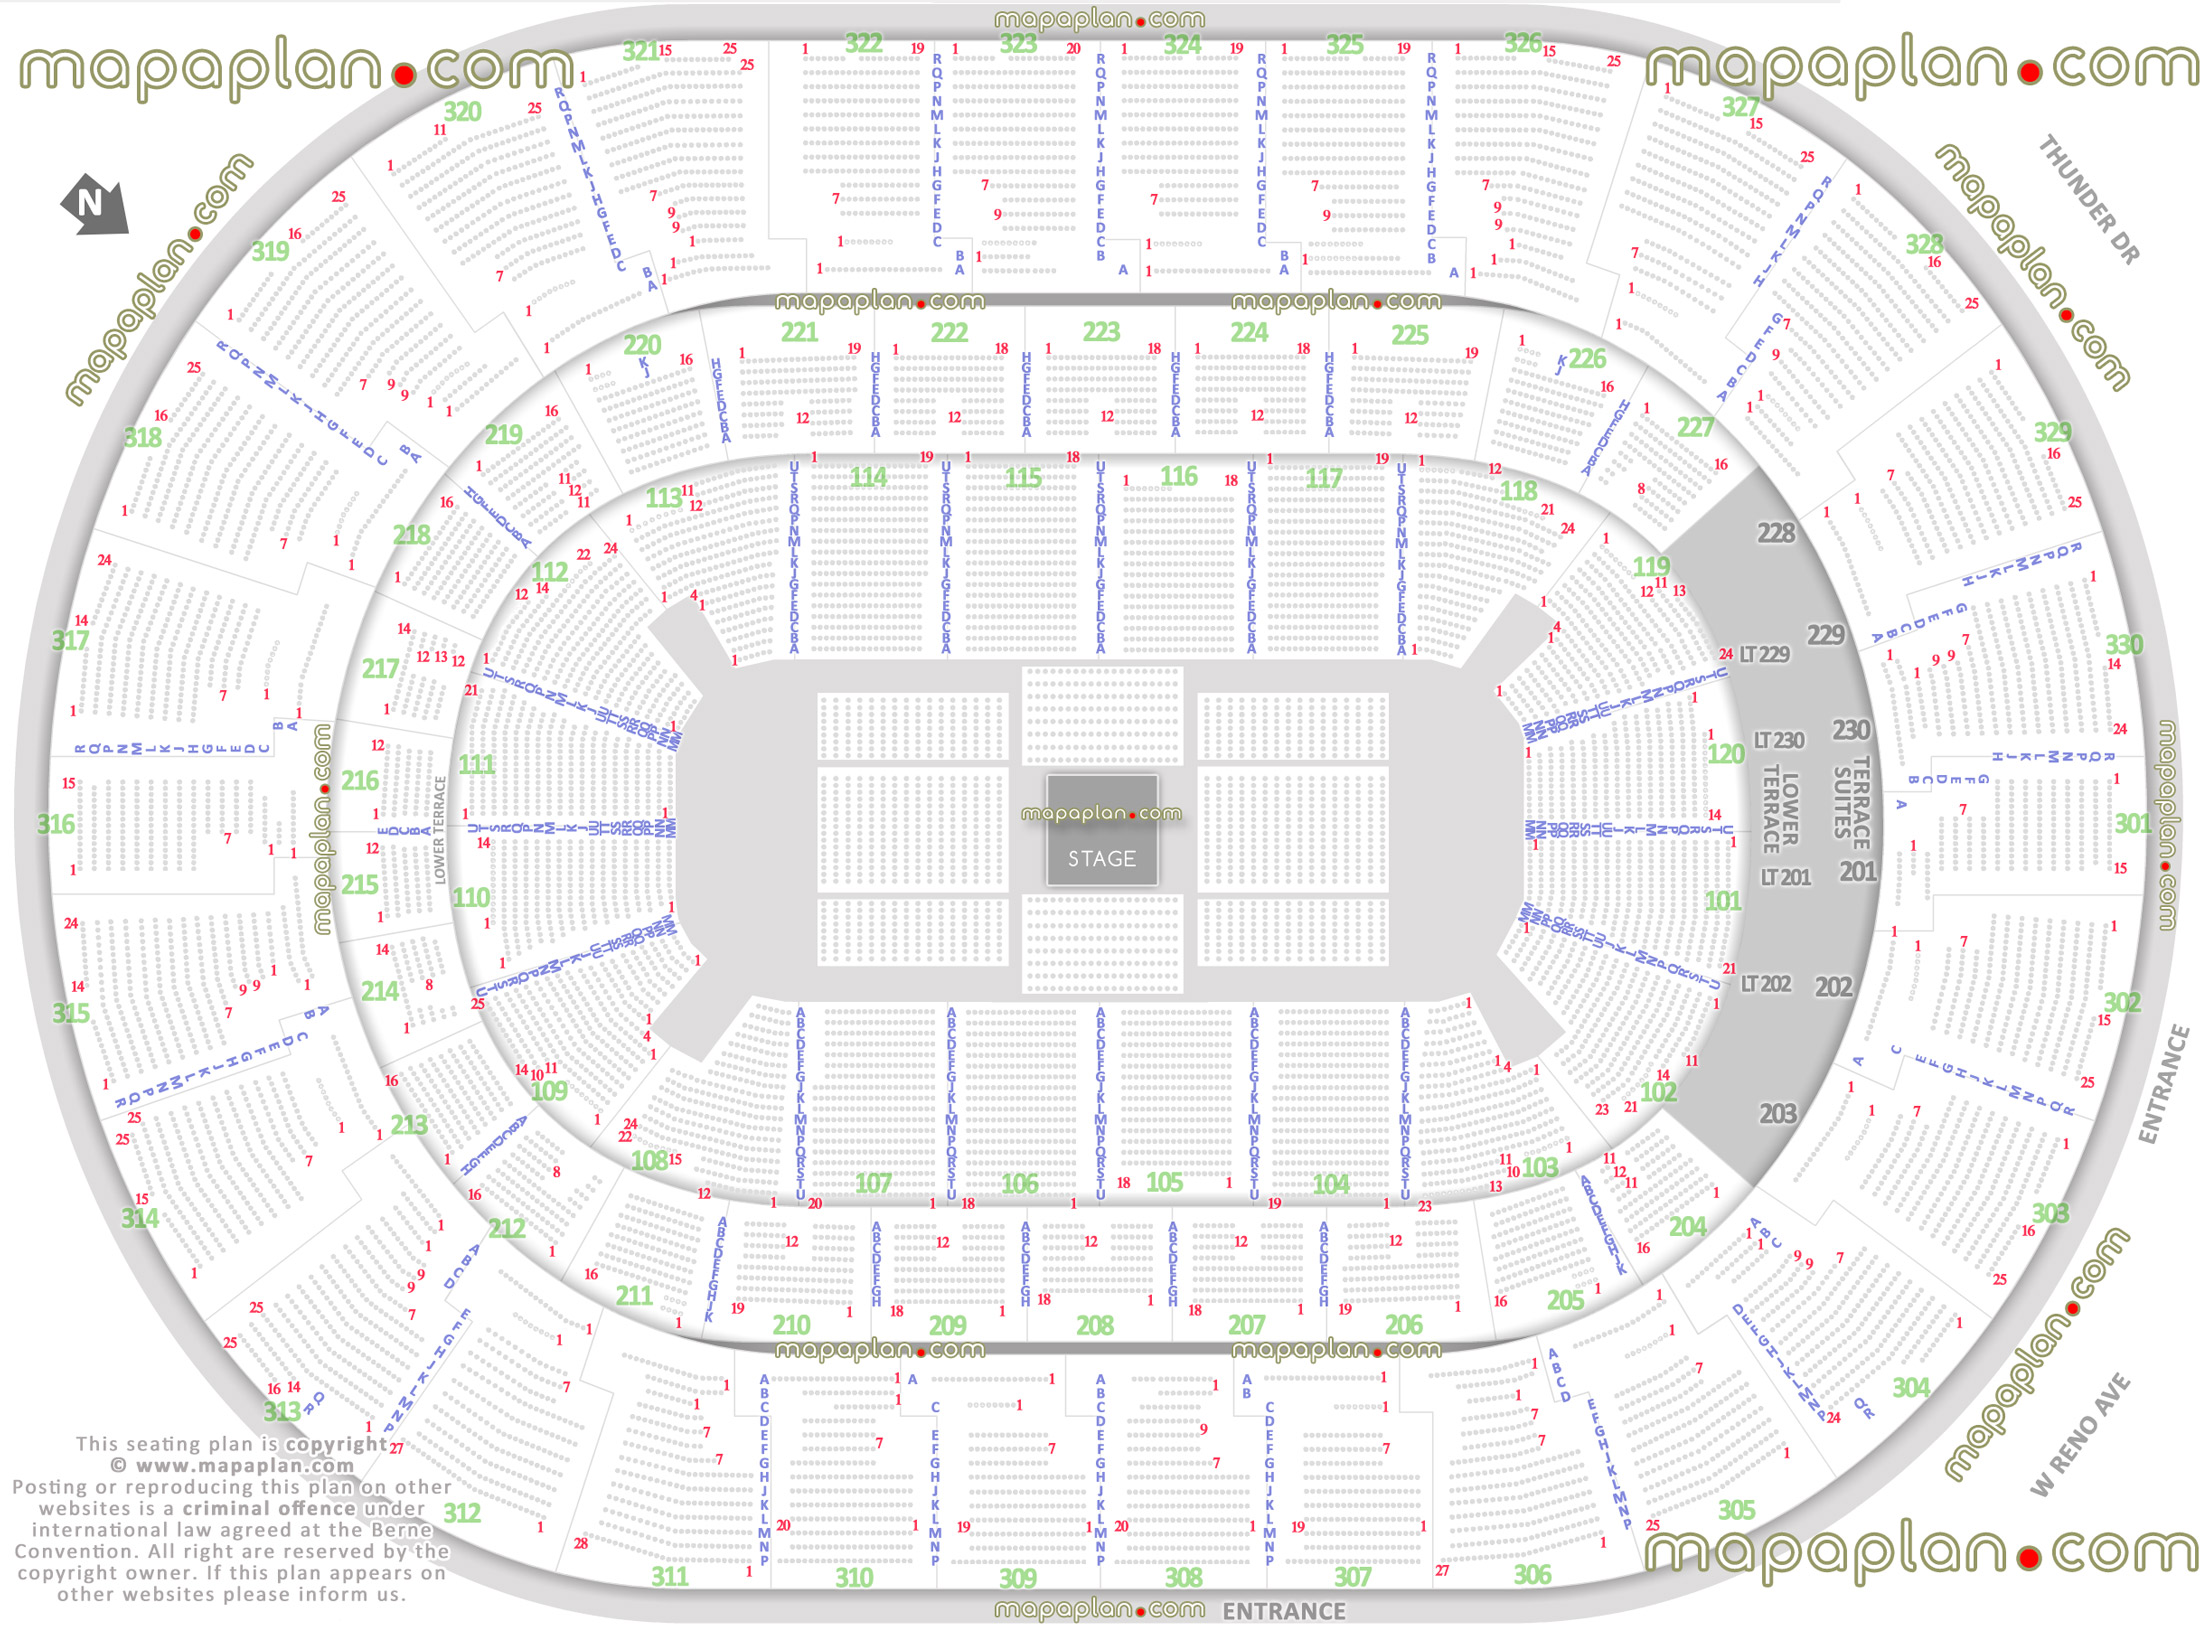 concert stage round printable virtual layout 360 degree arrangement interactive diagram seats row lower club upper sections seats 201 202 203 204 205 206 207 208 209 210 211 212 213 214 215 216 217 218 219 220 221 222 223 224 225 226 227 228 229 230 Oklahoma City Chesapeake Energy Arena seating chart